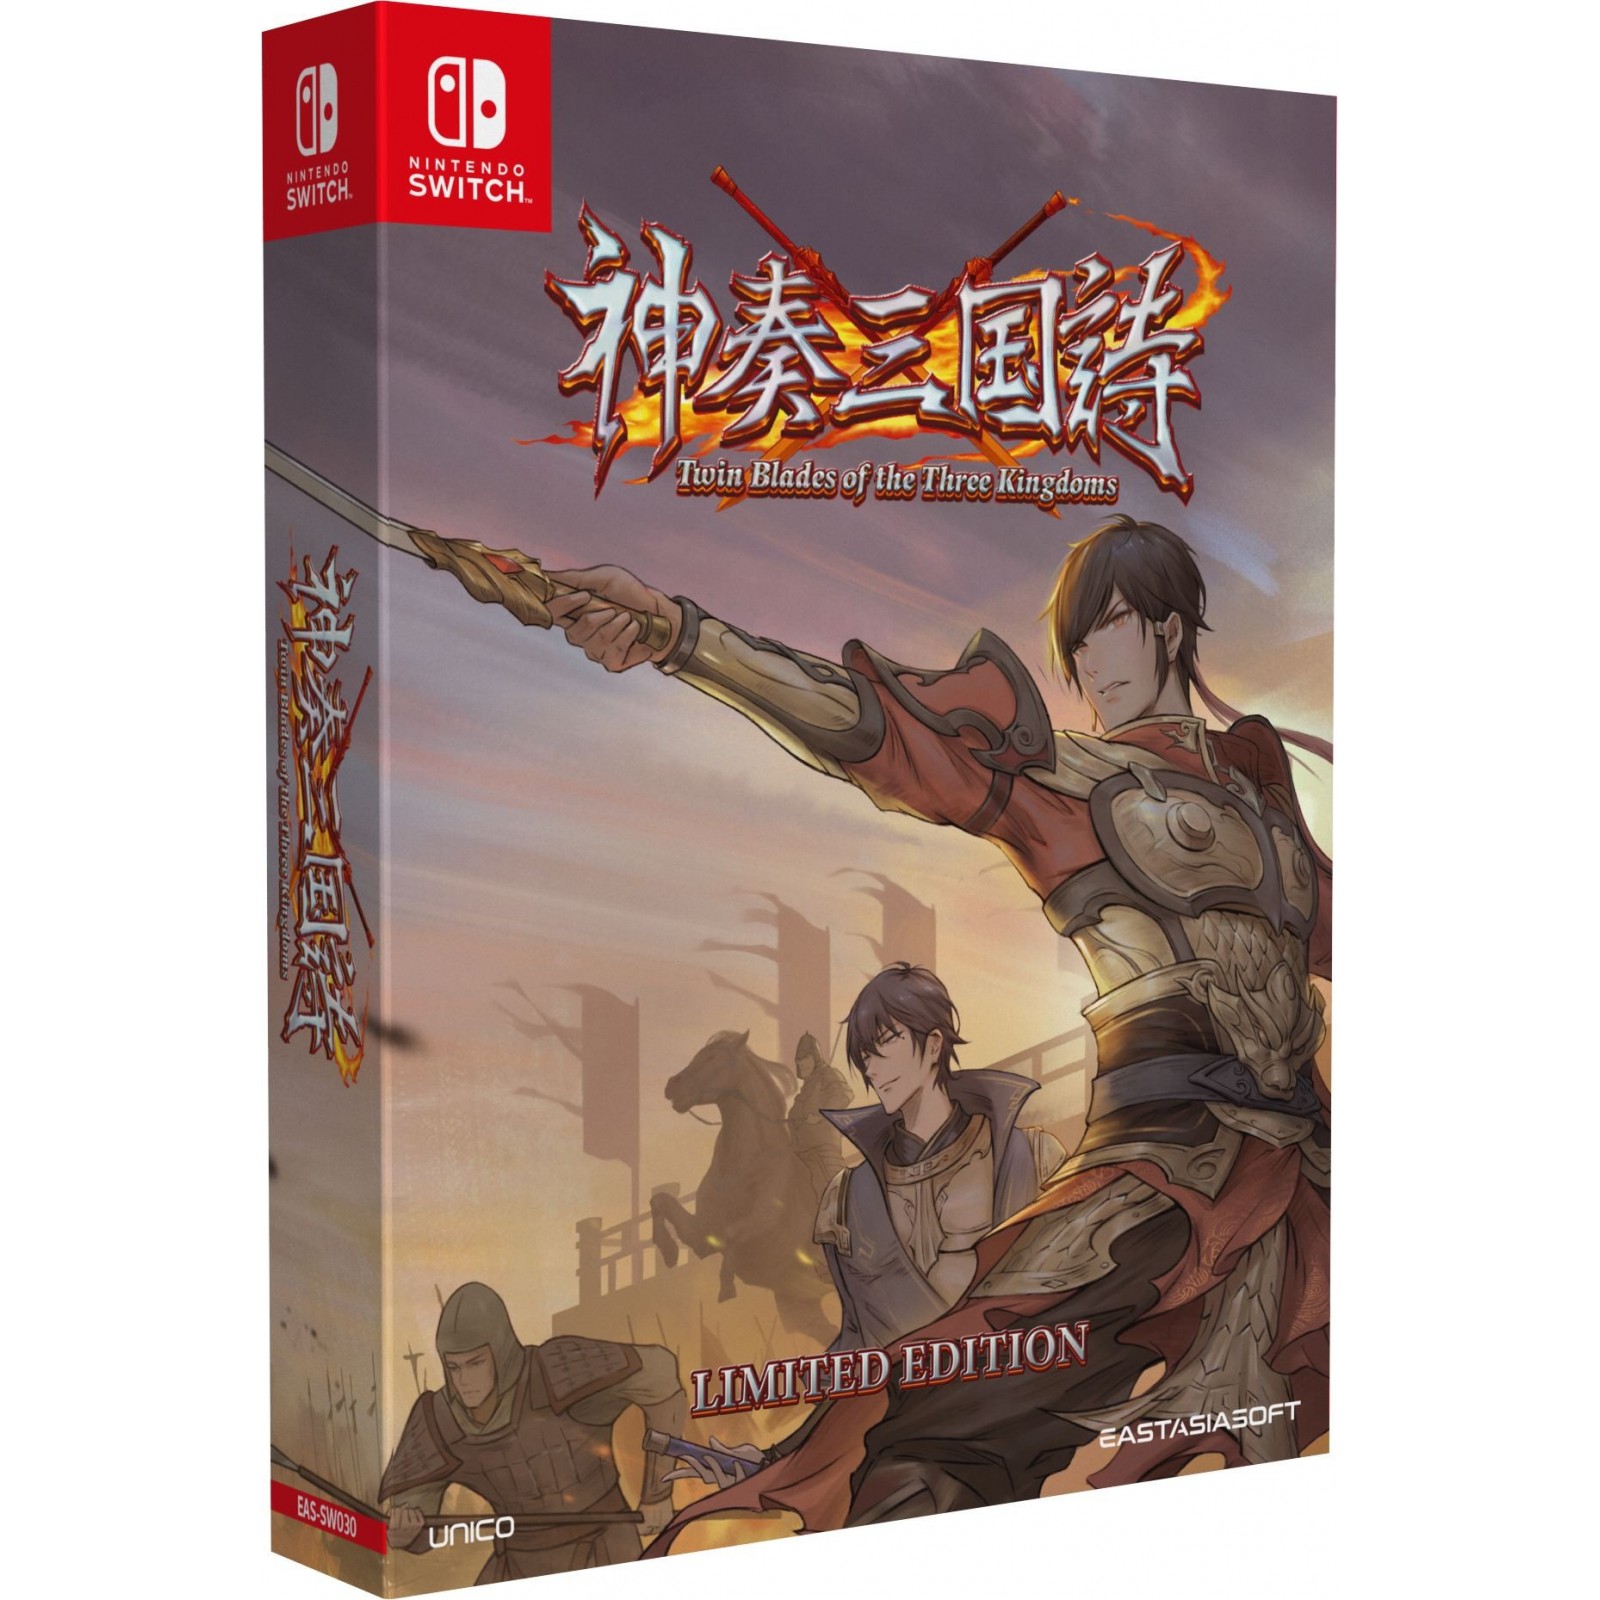 Twin Blades of the Three Kingdoms (Limited Edition) (Import)